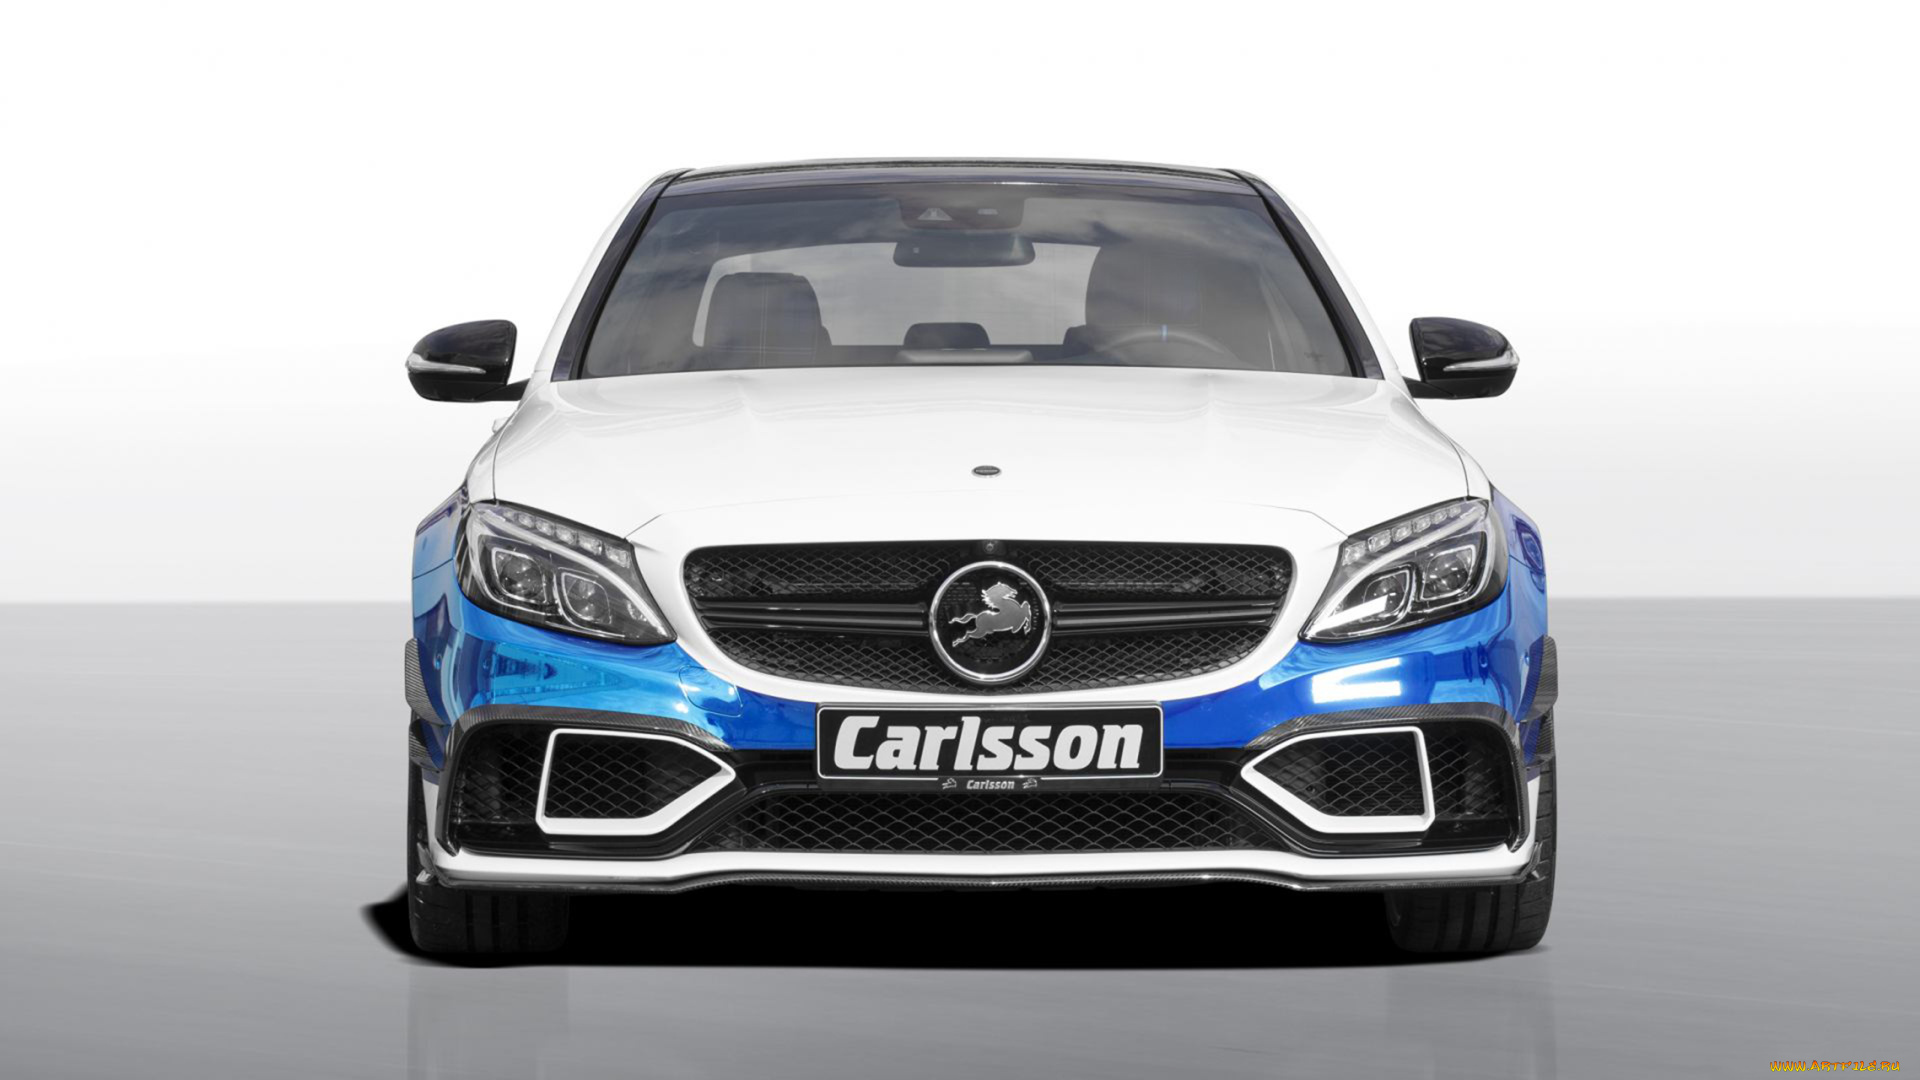 carlsson, cc63s, rivage, based, on, mercedes-benz, amg, c63-s, 2016, автомобили, -unsort, based, rivage, cc63s, carlsson, 2016, c63-s, amg, mercedes-benz